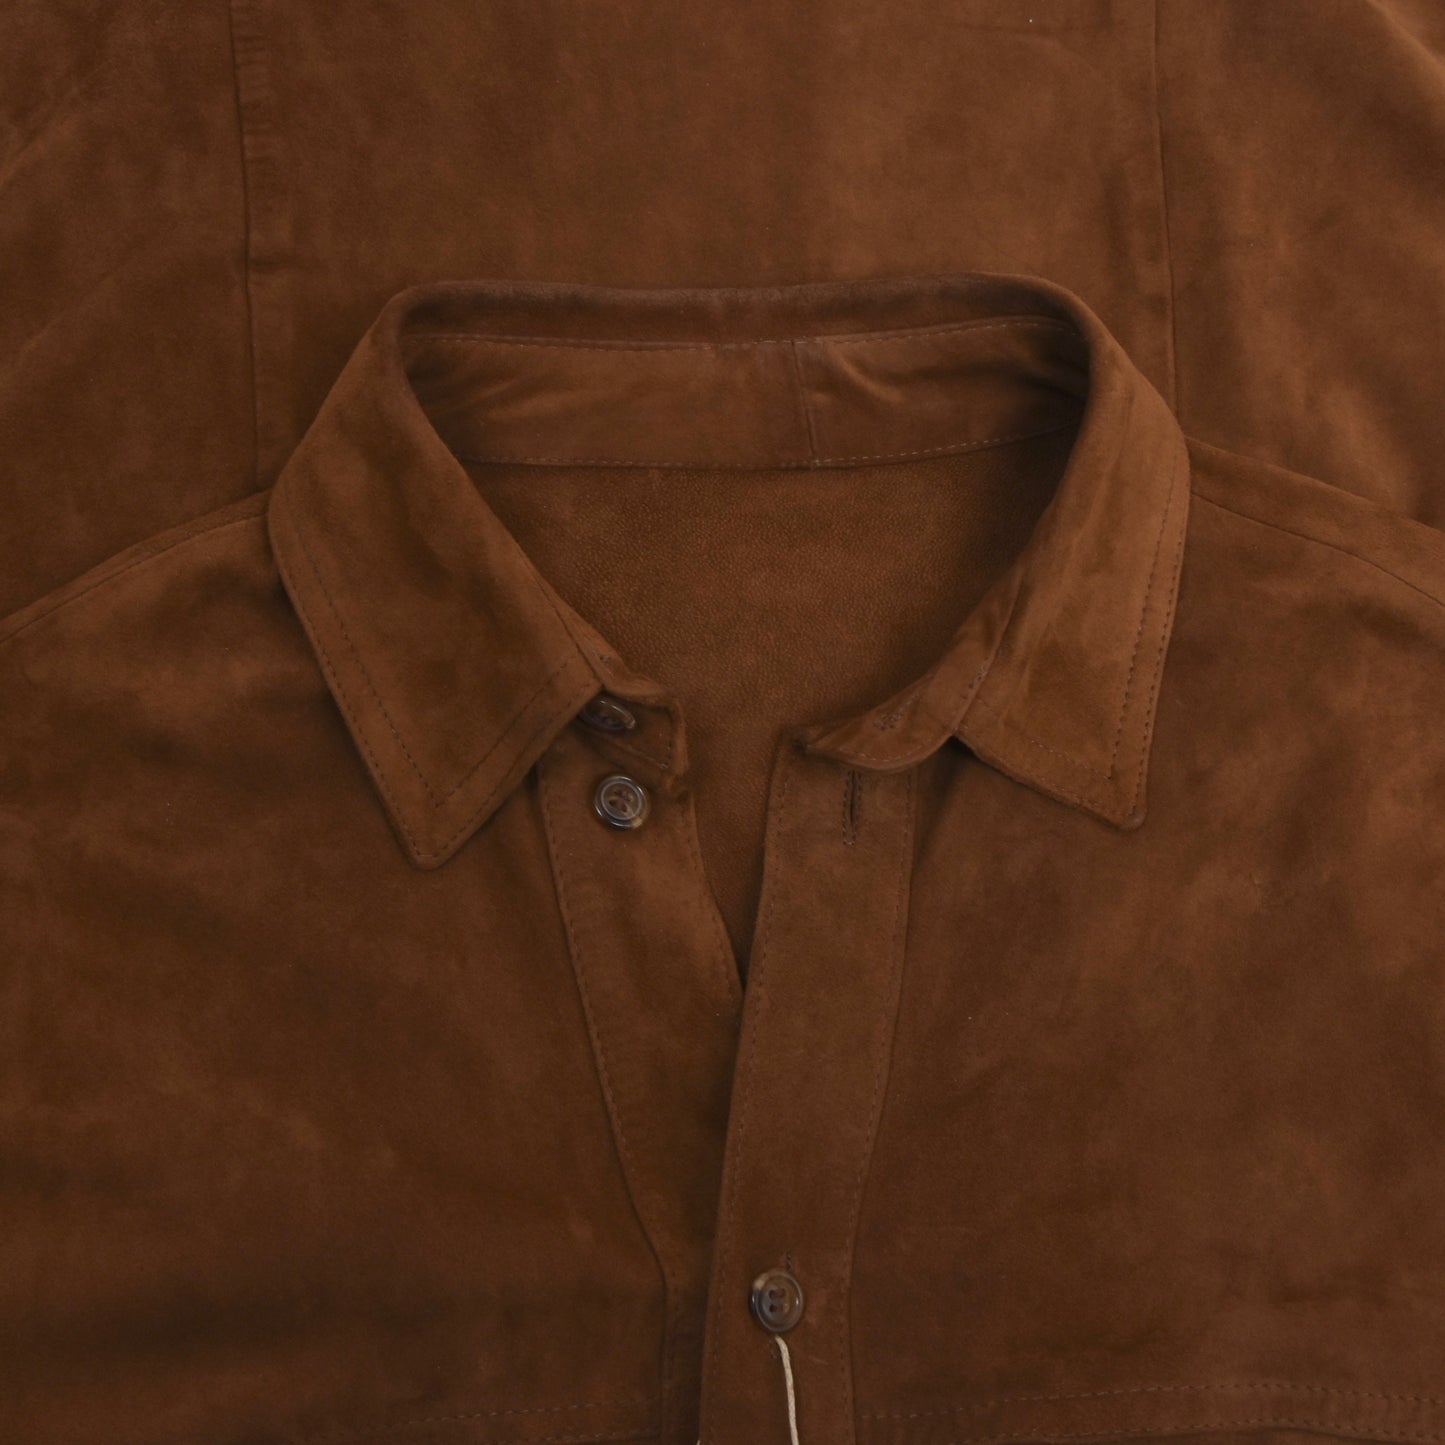 Suede Leather Shirt Size L - Brown